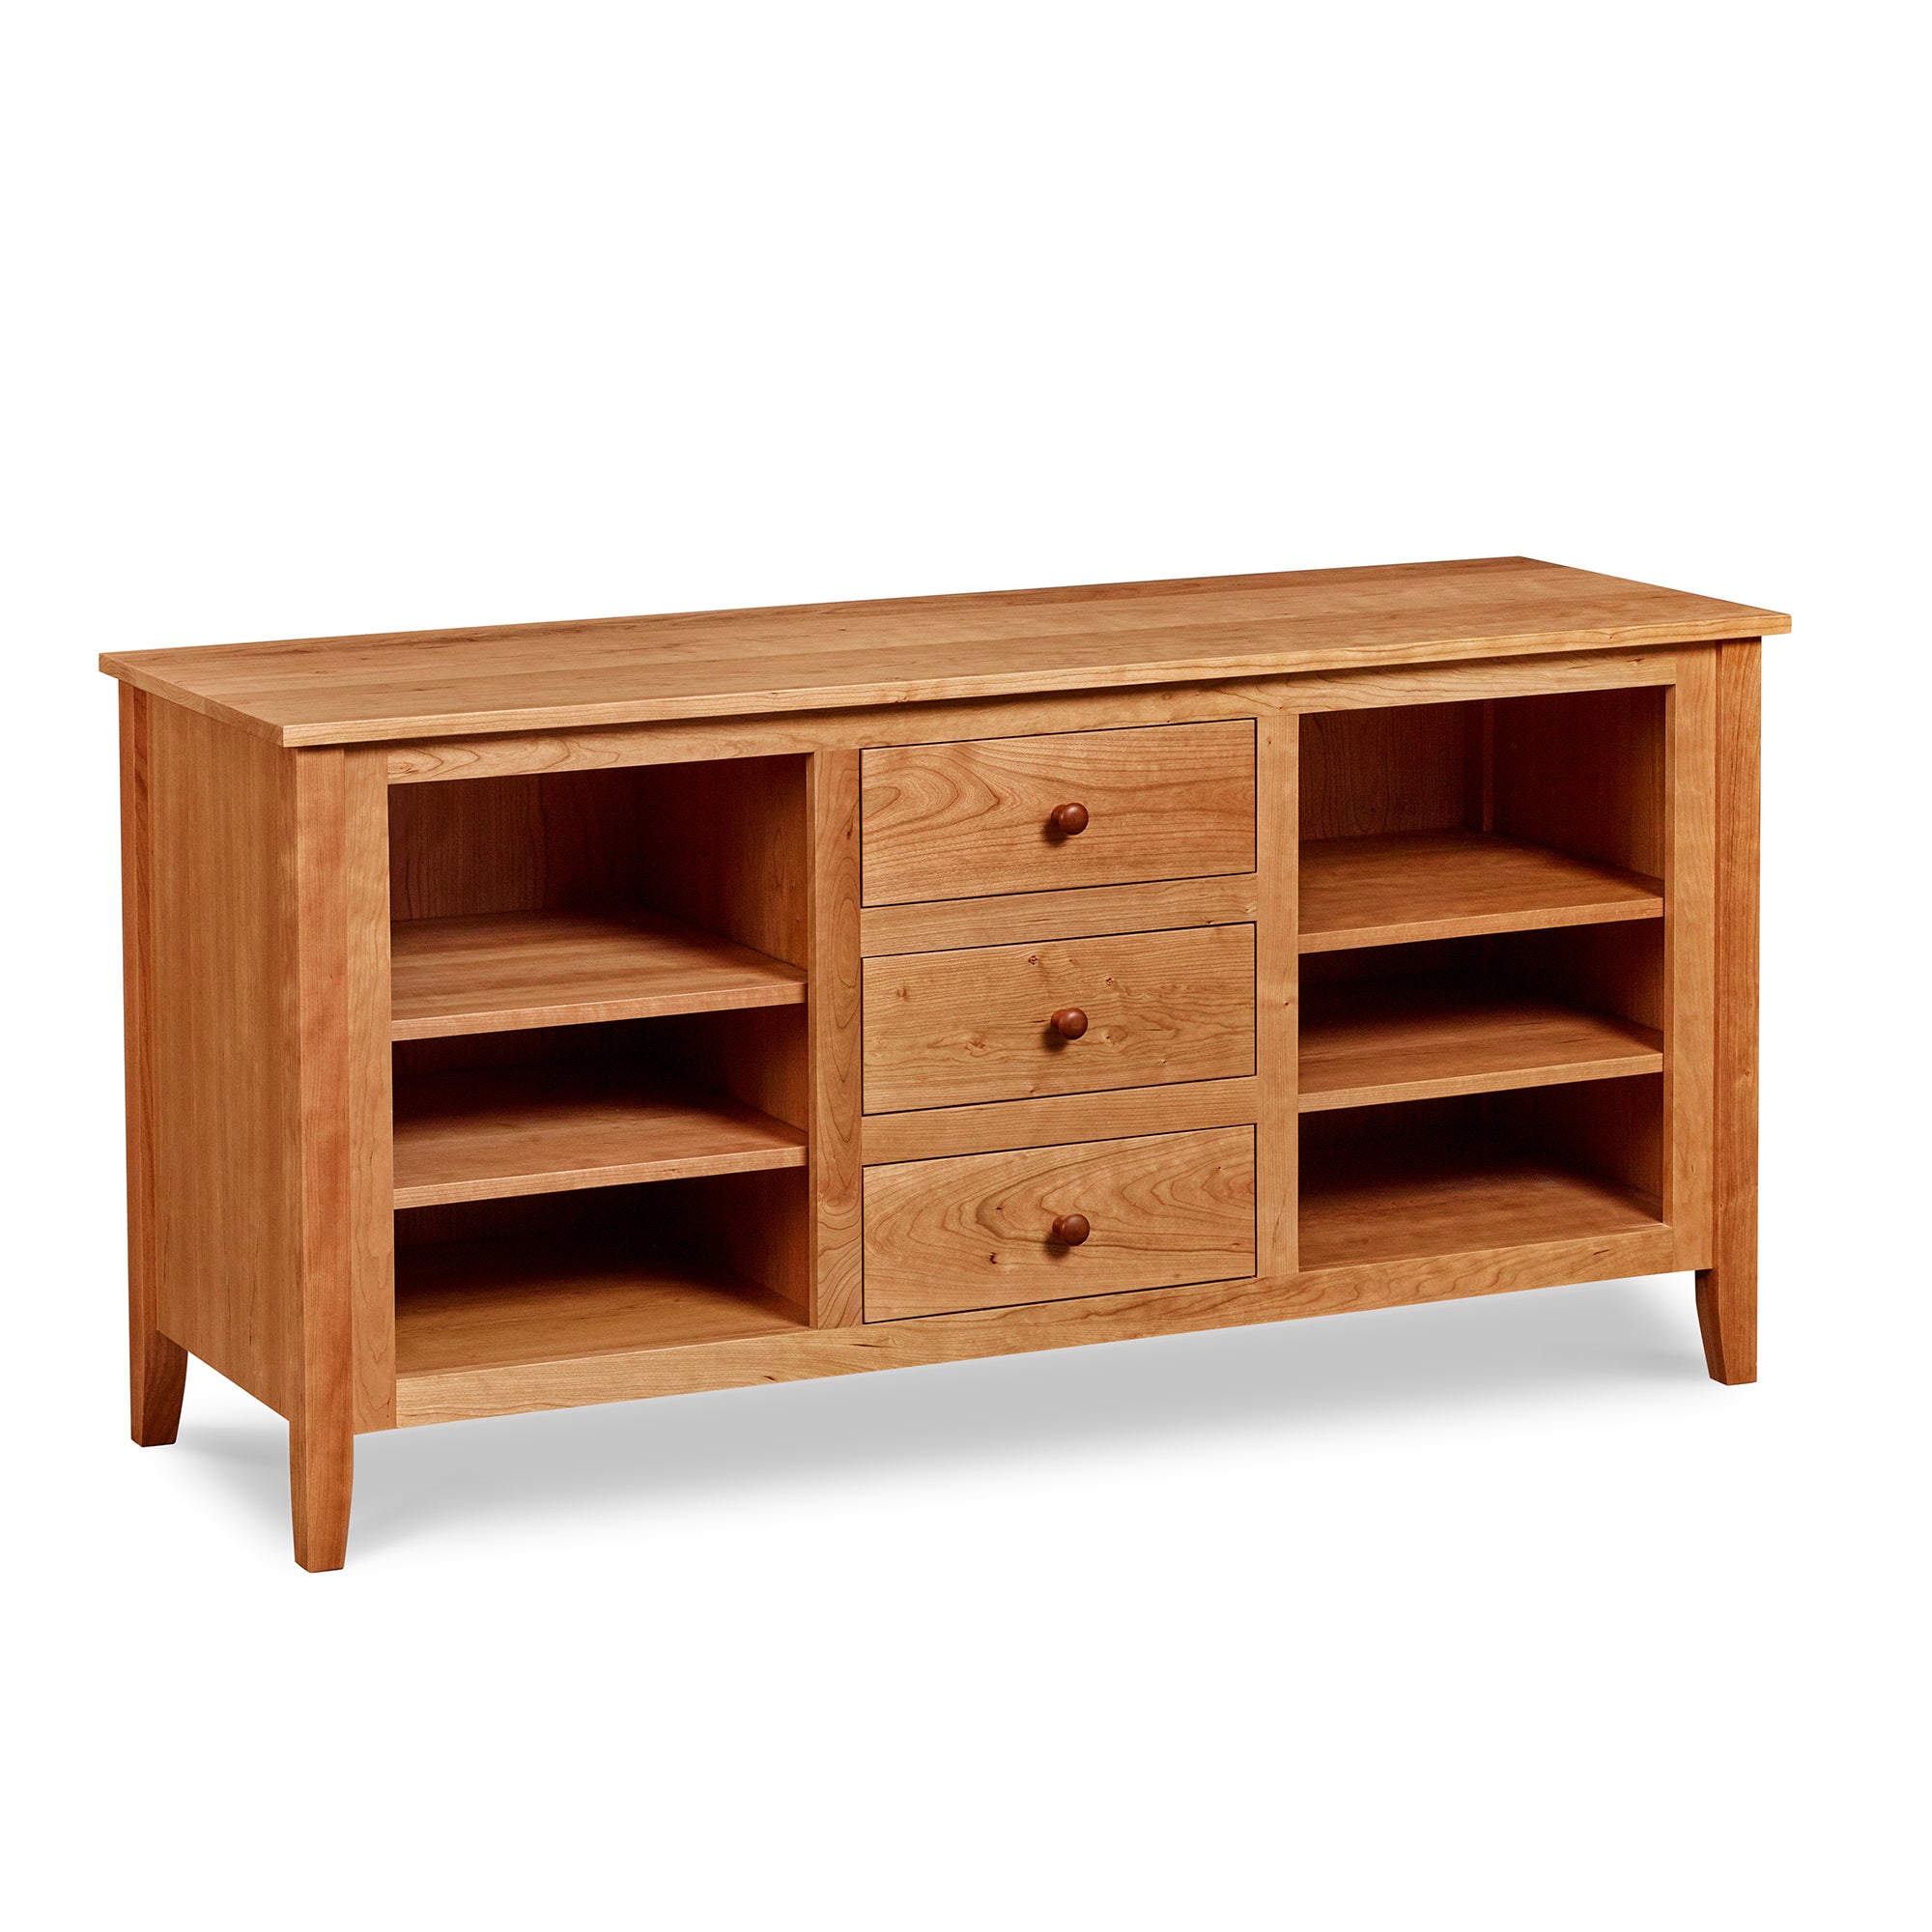 Cherry wood Salmon Falls Media Console with three centered drawers with storage shelves on both sides